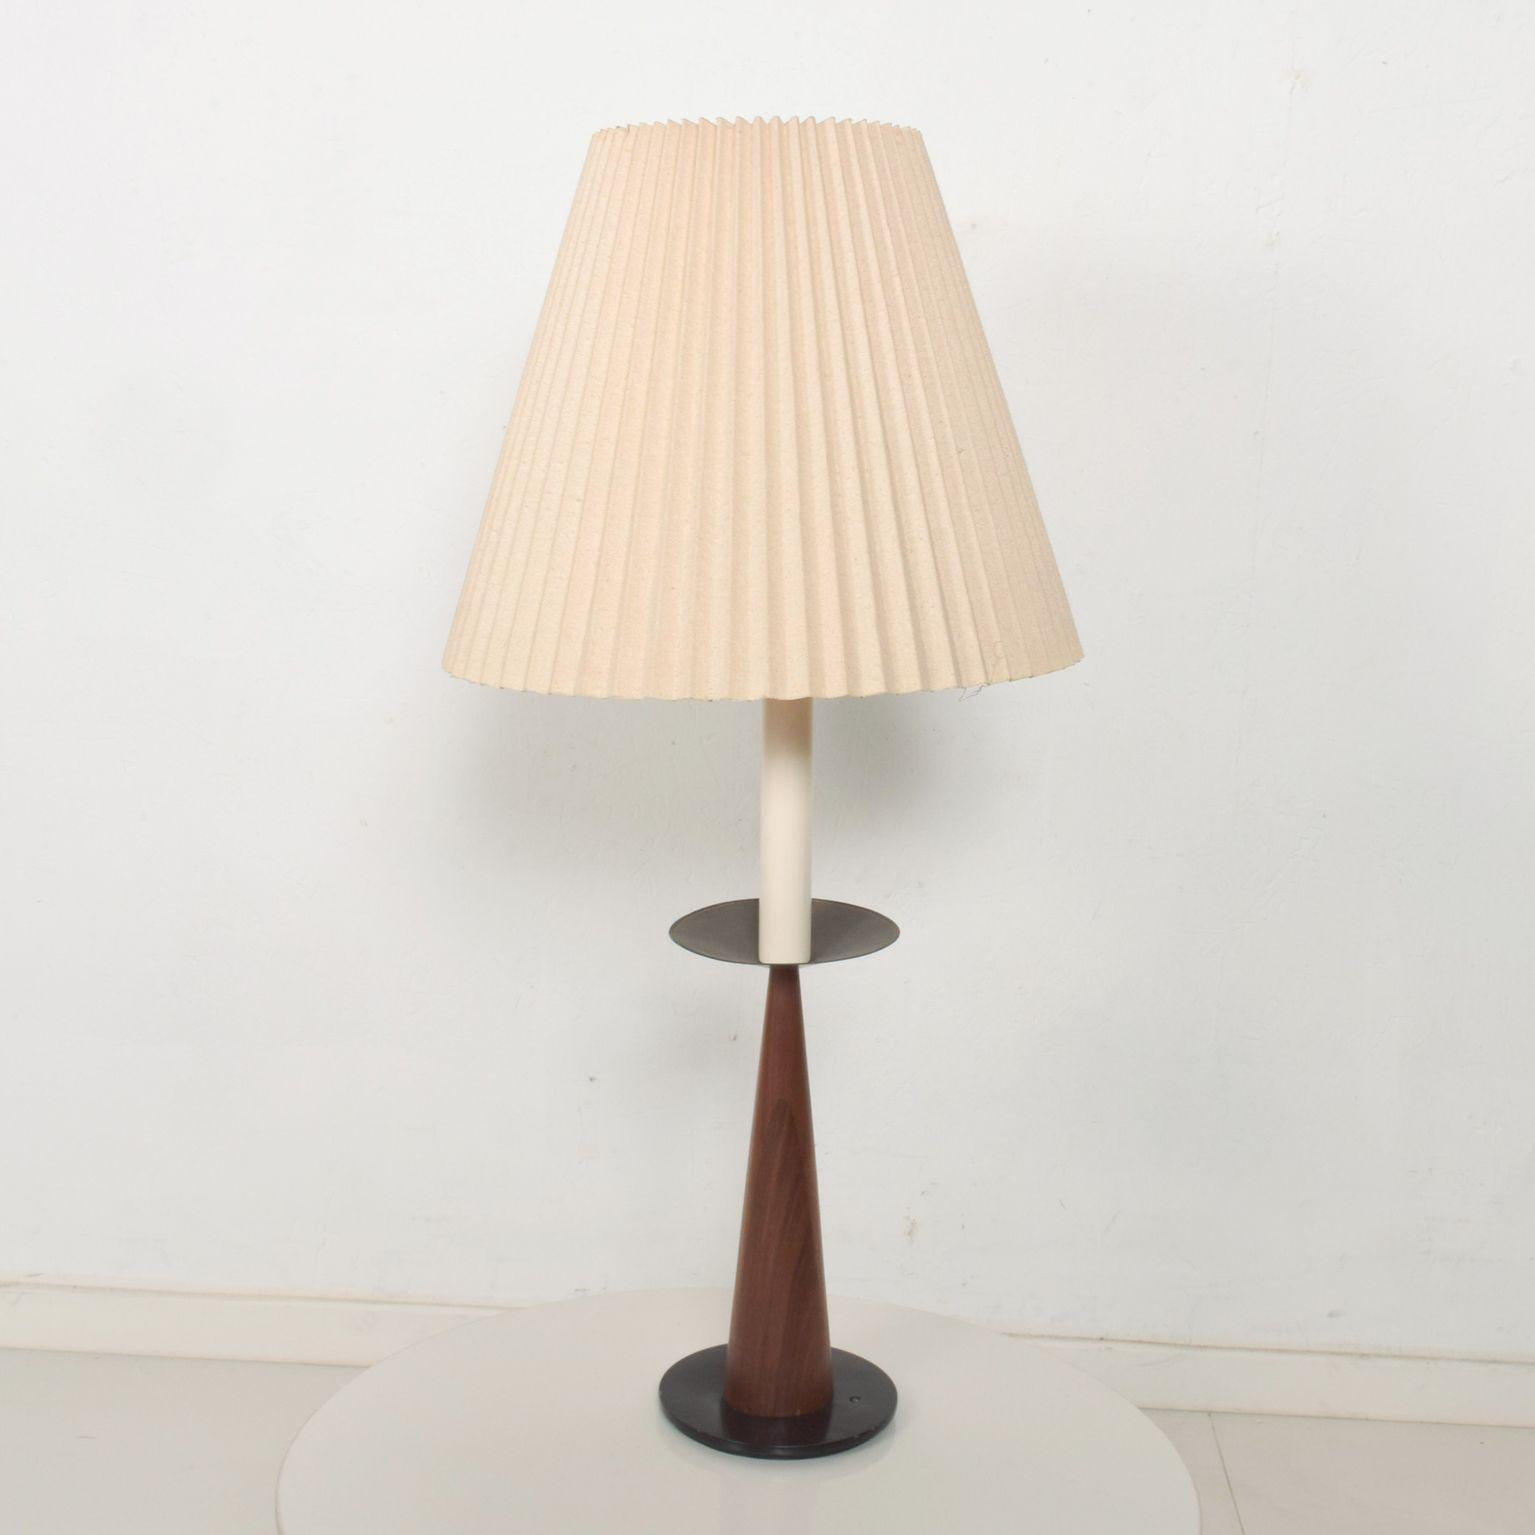 Mexican Sleek Modernism Custom Cone Shaped TABLE Lamp Mahogany and Bronze 1960s Mexico